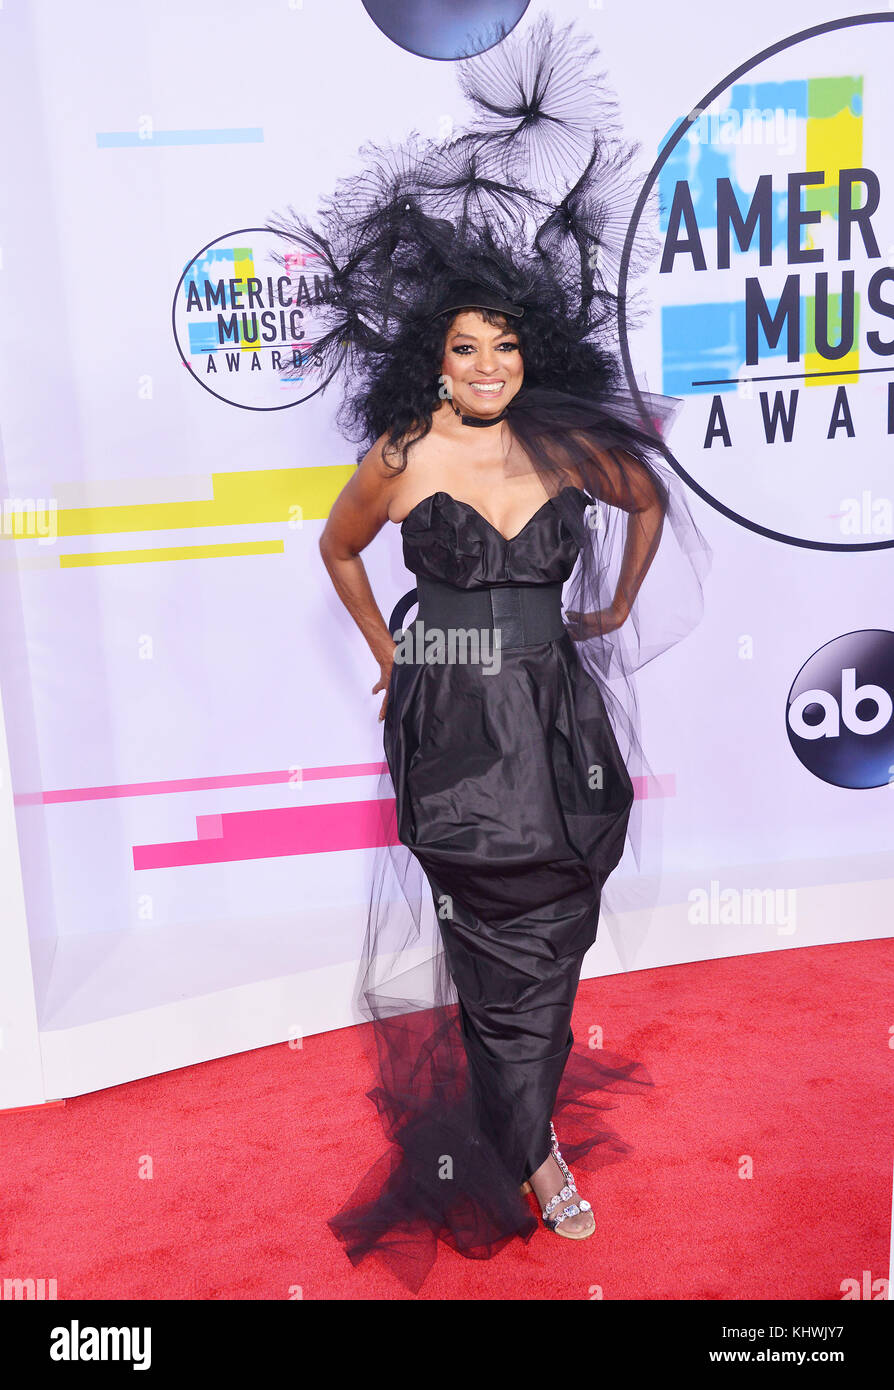 Los Angeles, USA. 19th Nov, 2017. Diana Ross 305 arrives at the 2017 American Music Awards at Microsoft Theater on November 19, 2017 in Los Angeles, California Credit: Tsuni/USA/Alamy Live News Stock Photo